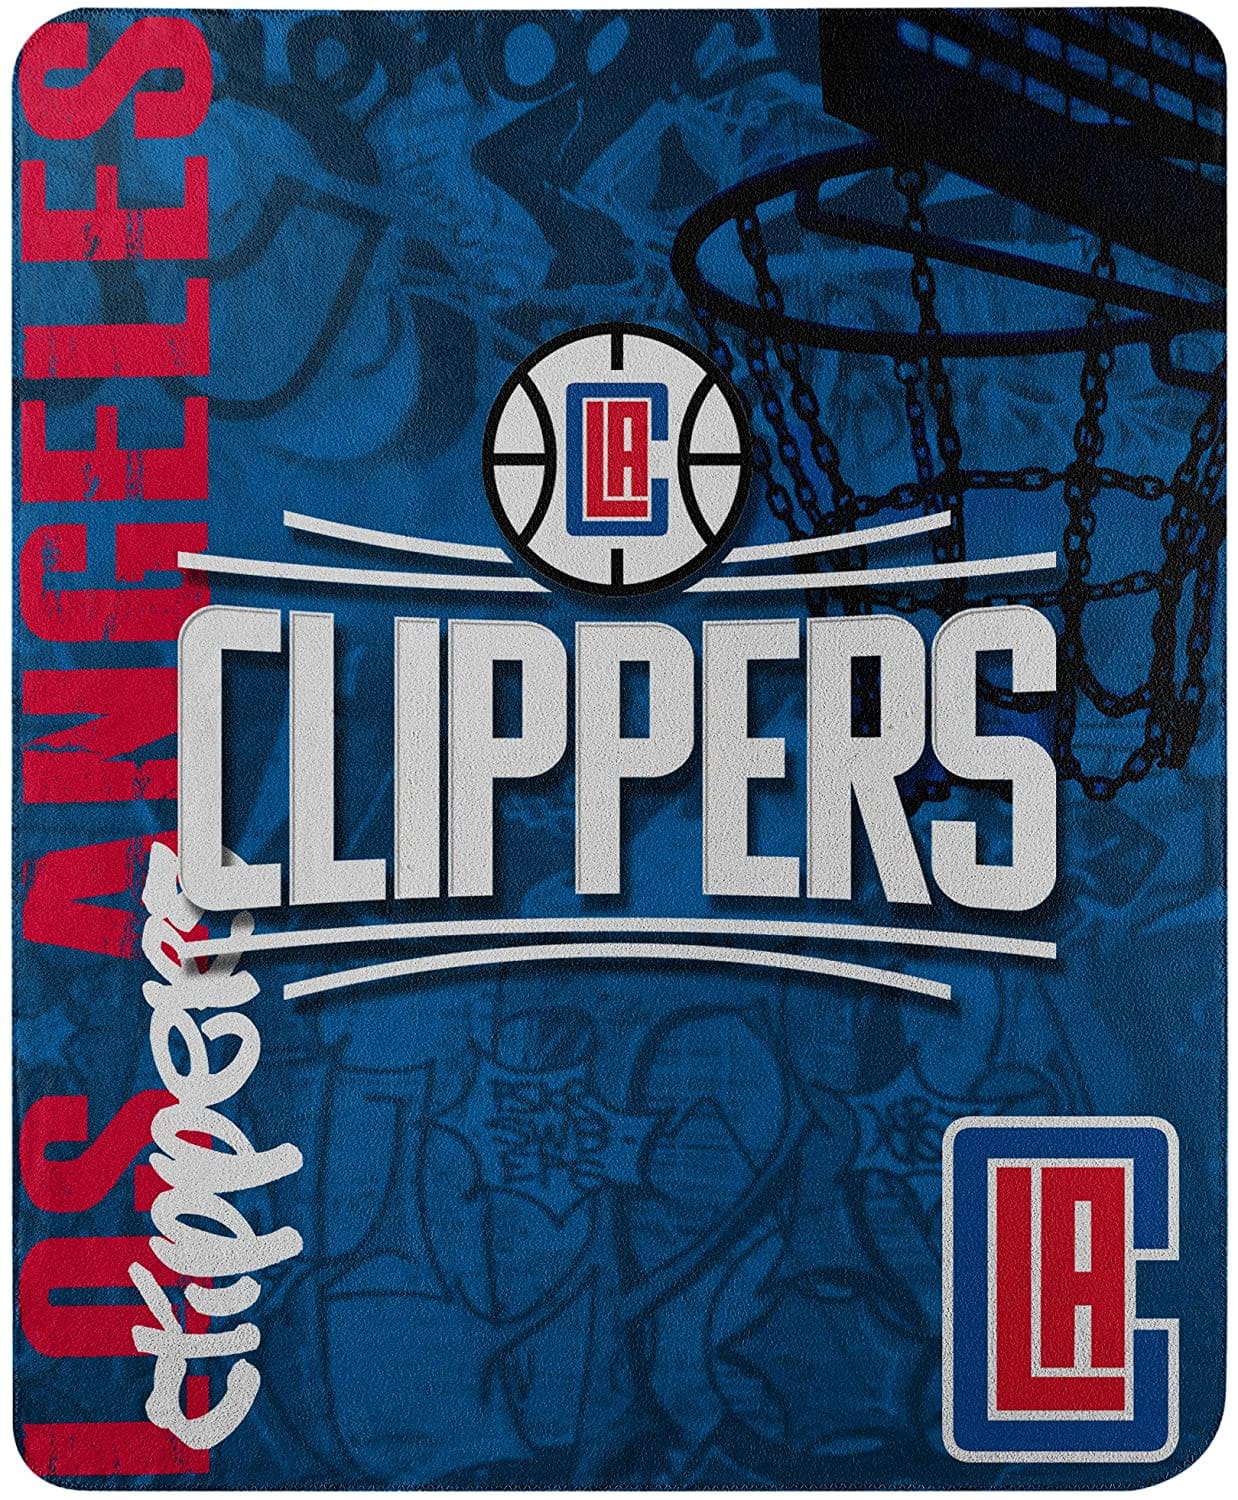 Officially Licensed Nba Throw Los Angeles Clippers Fleece Blanket